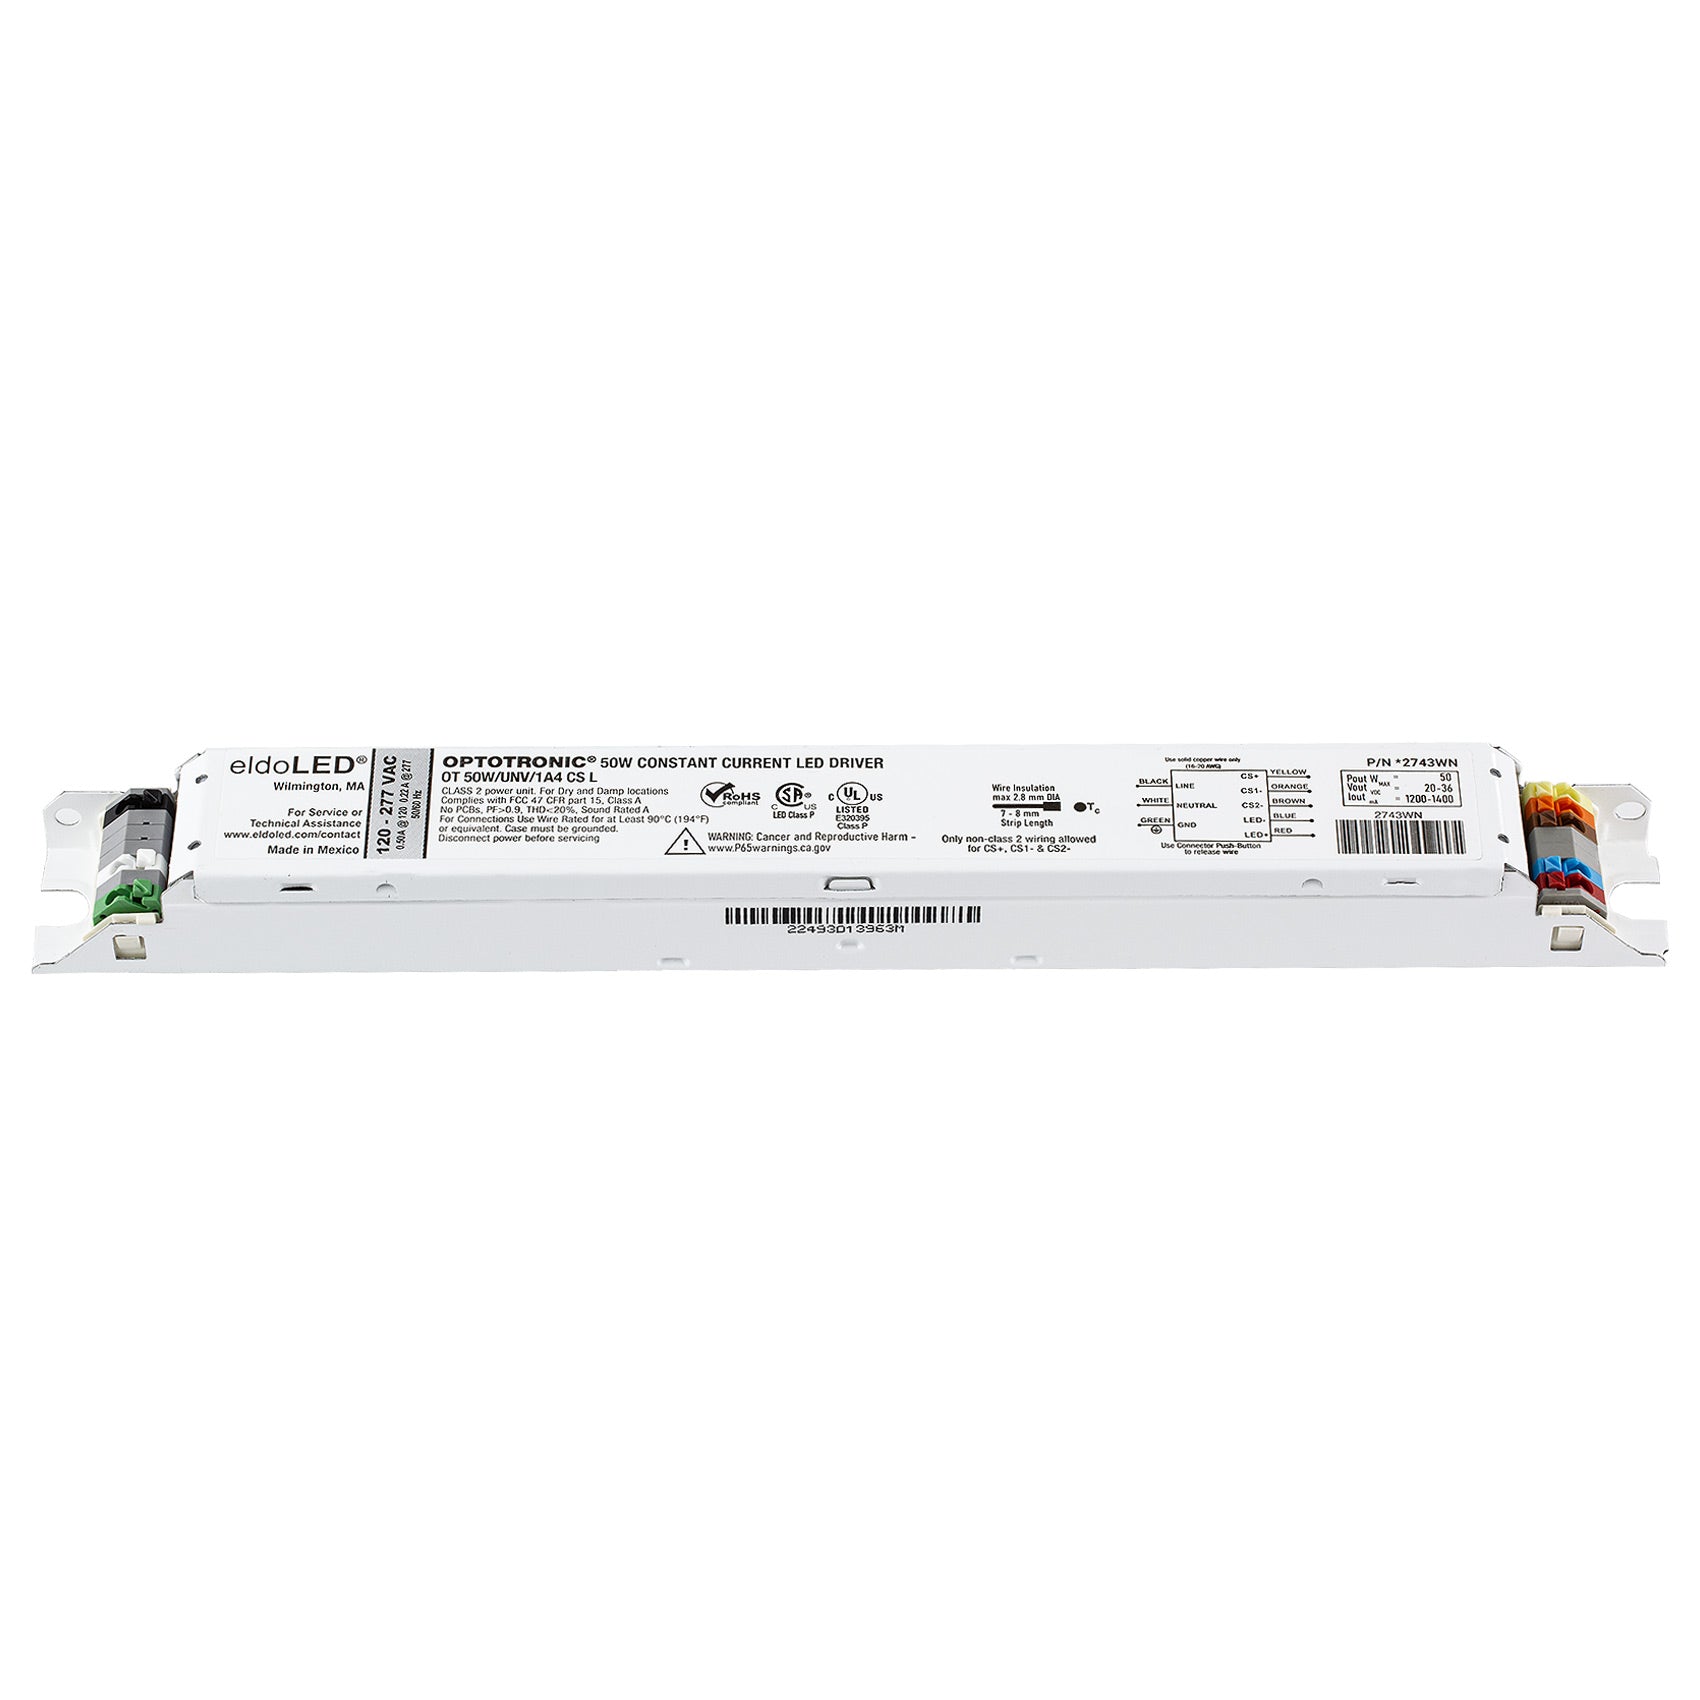 eldoLED *2743WN OPTOTRONIC 50W Constant Current Non-Dimmable LED